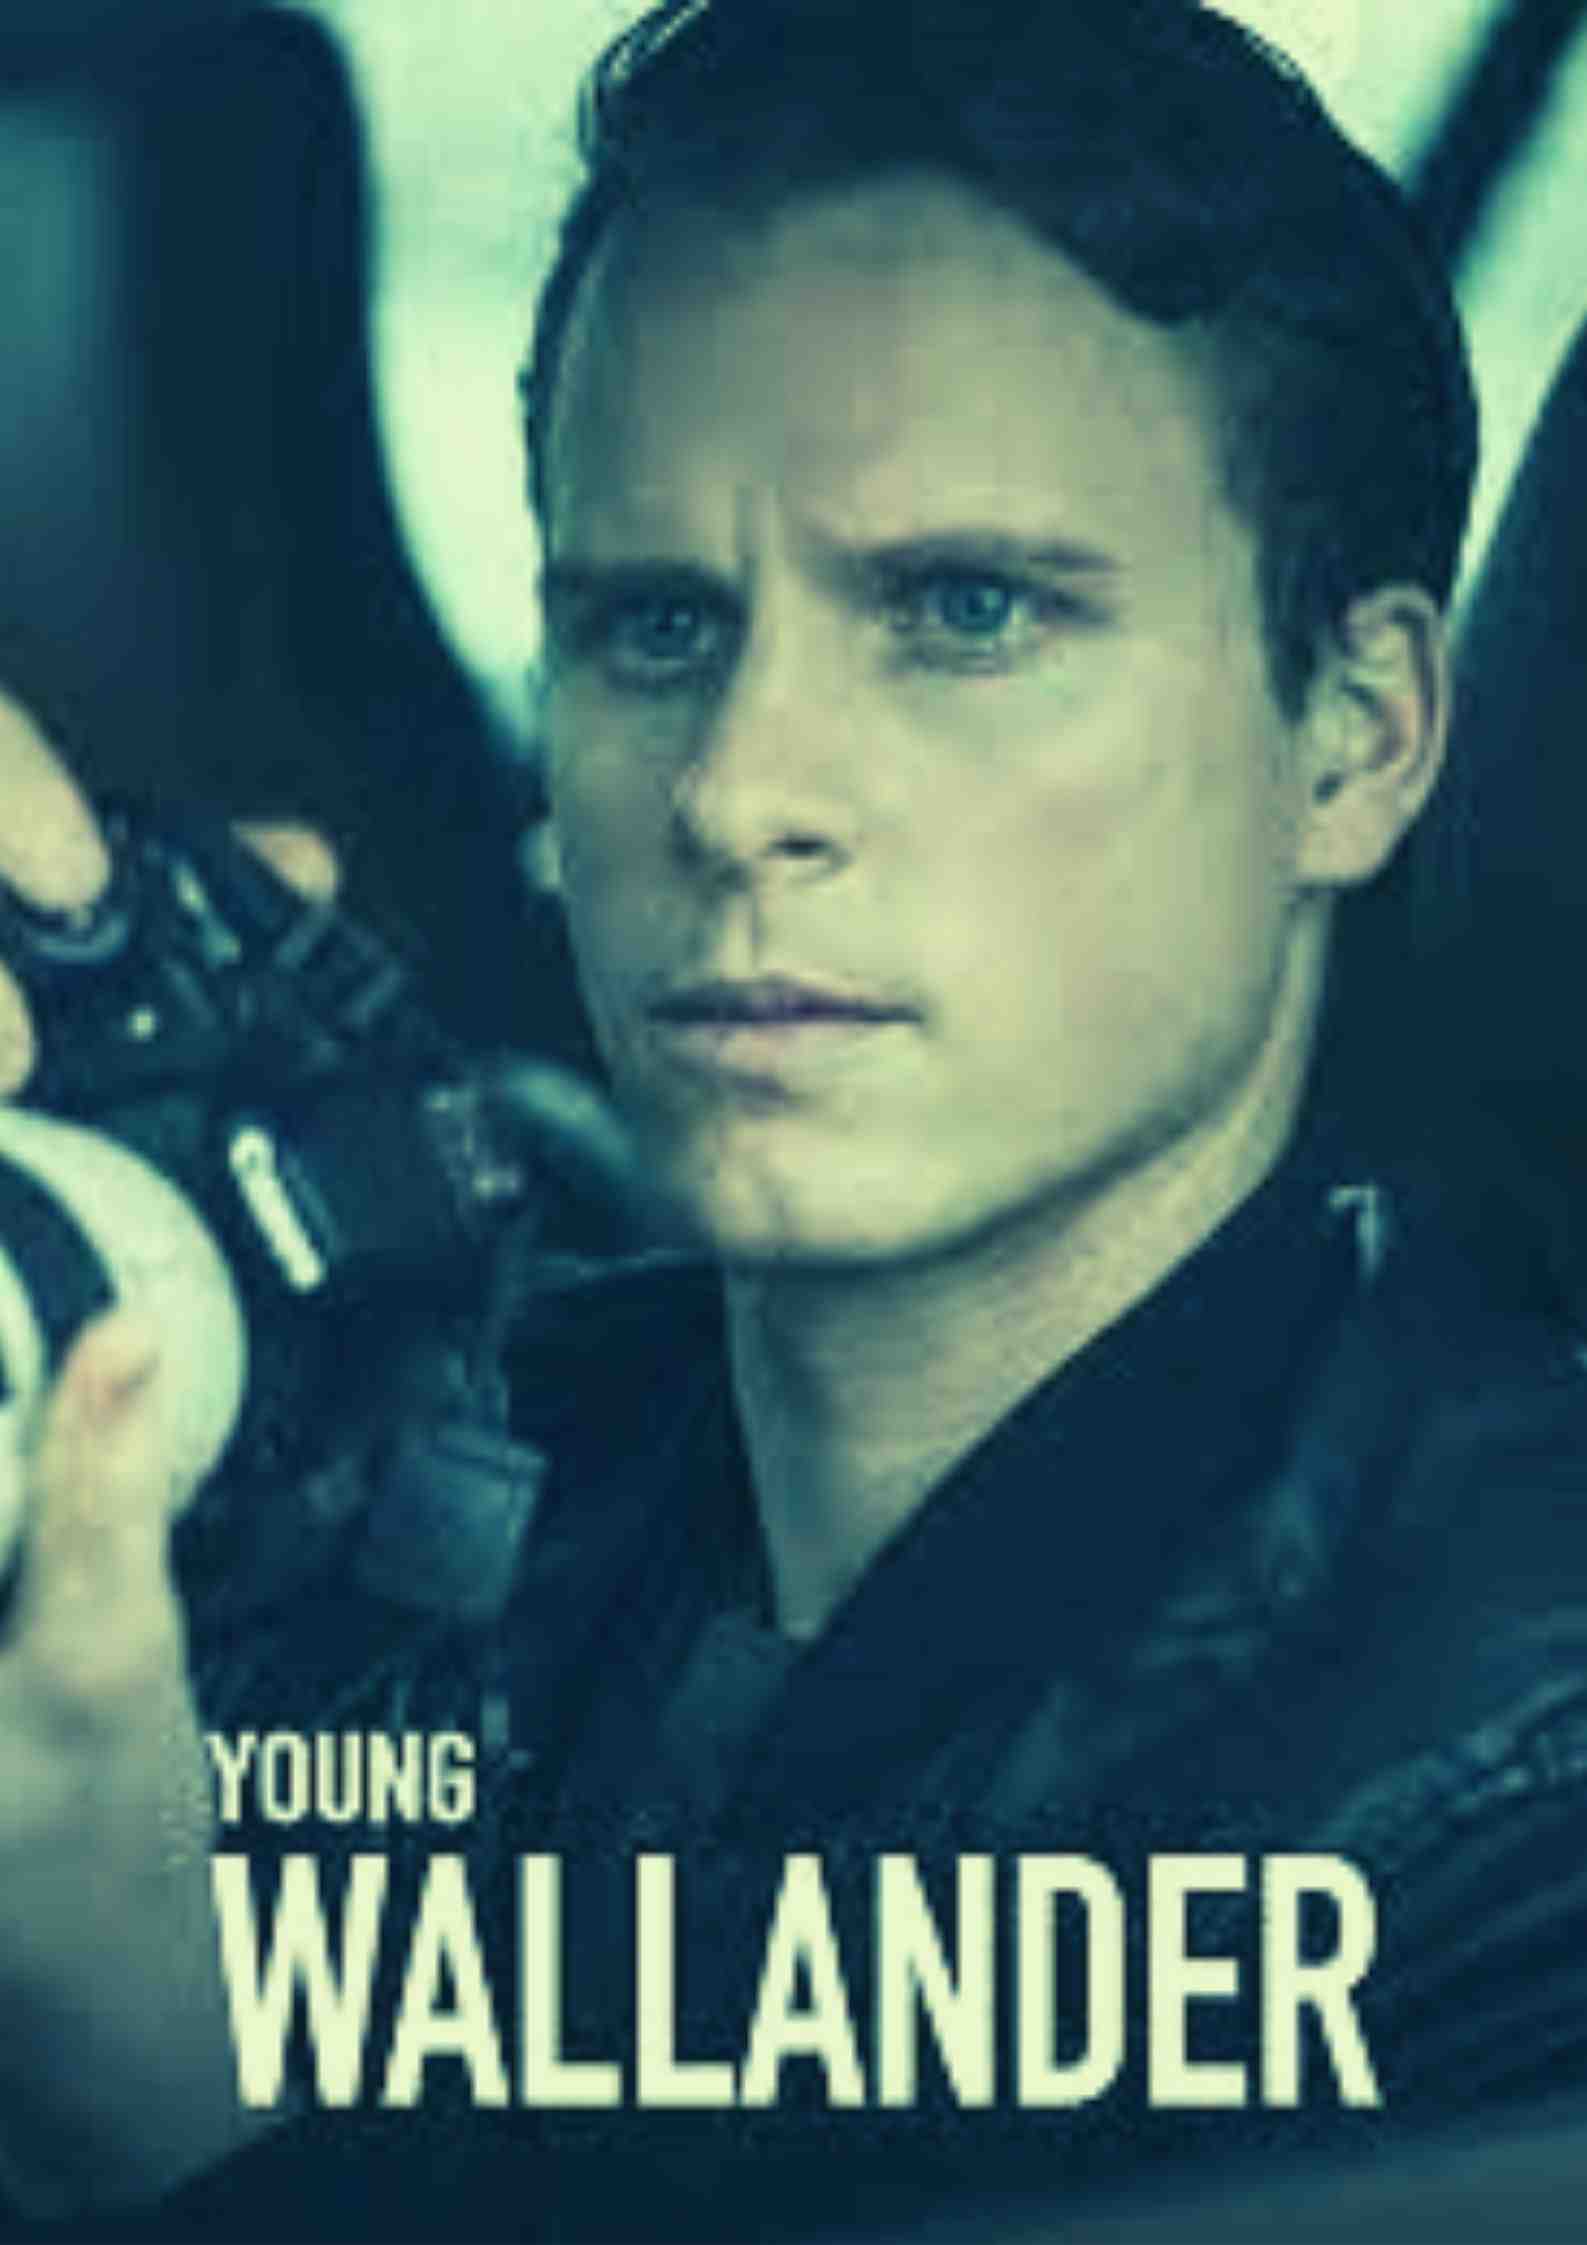 Young Wallander parents guide | age rating | 2020